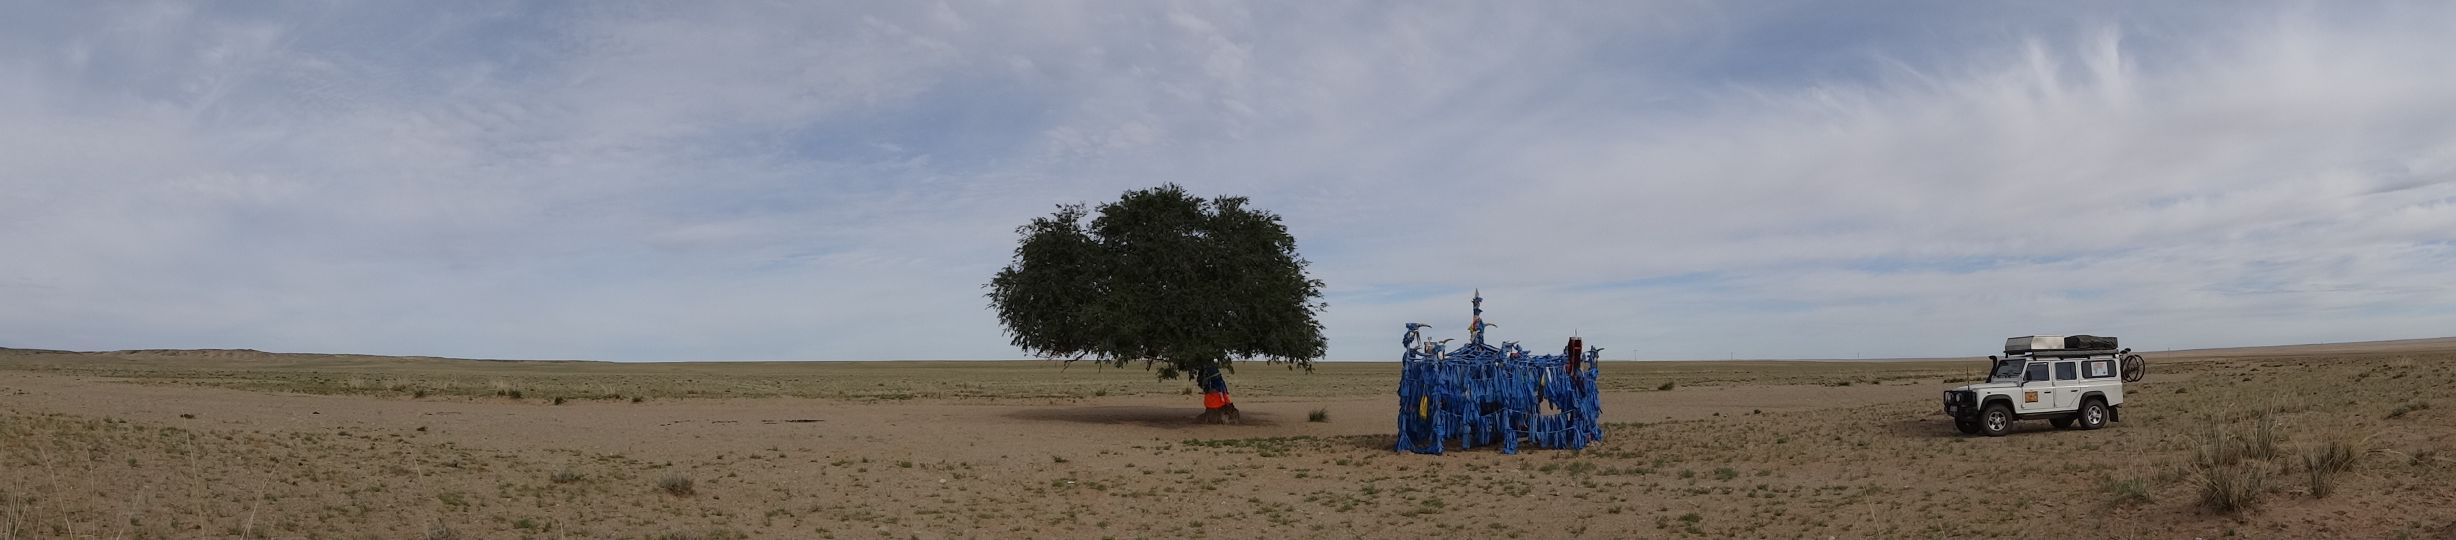 a lone tree in the Gobi Desert with an offering site next to it